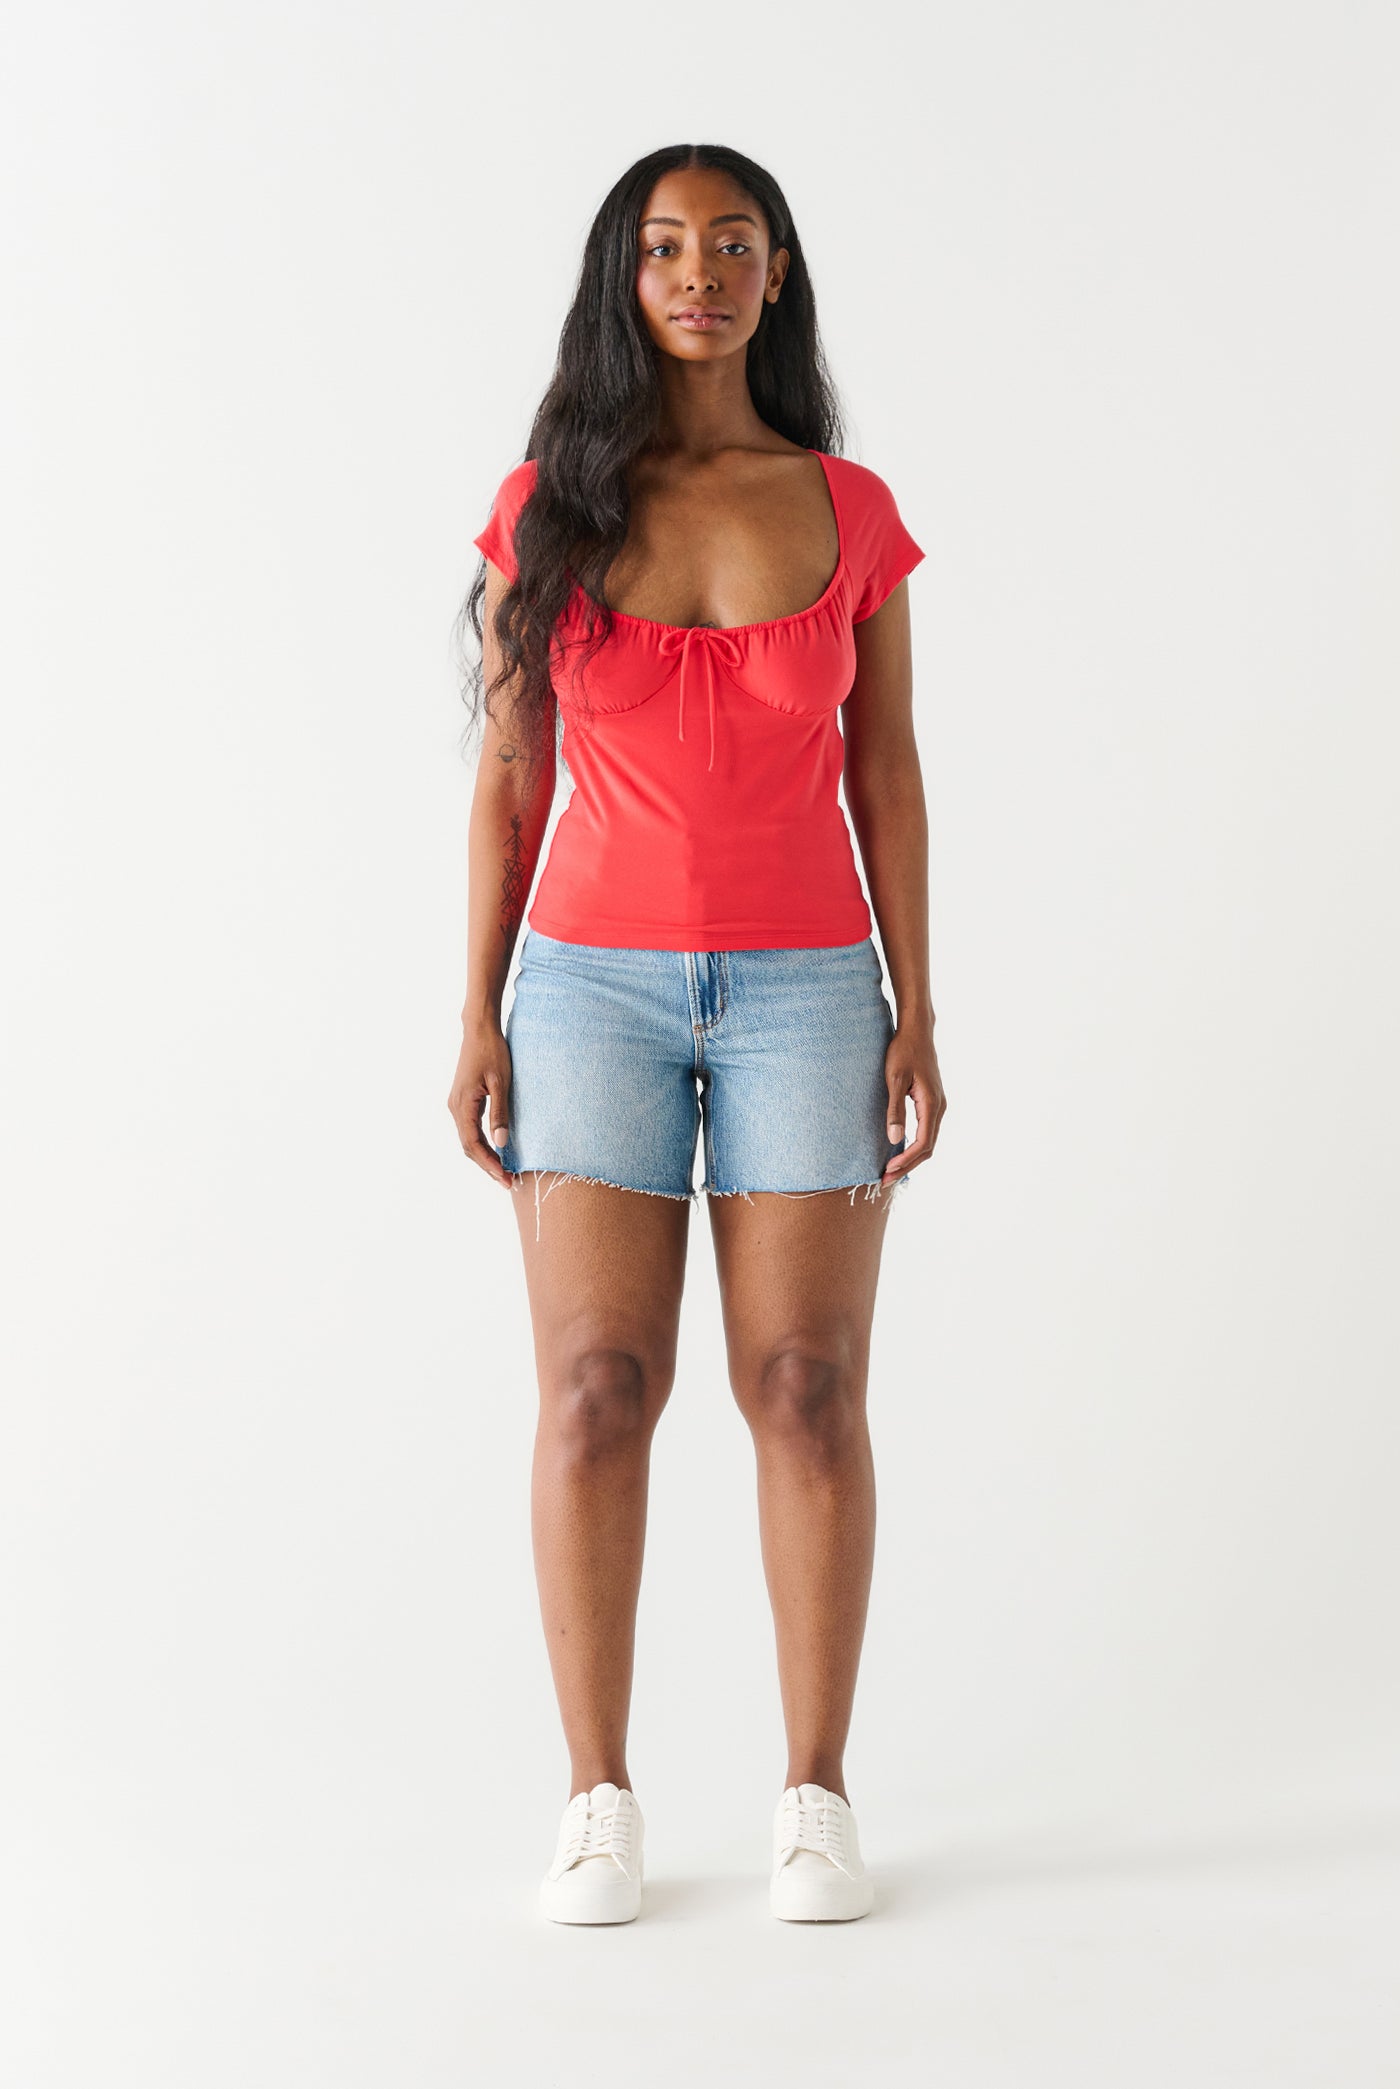 Sweetheart Top-Short Sleeves-Vixen Collection, Day Spa and Women's Boutique Located in Seattle, Washington